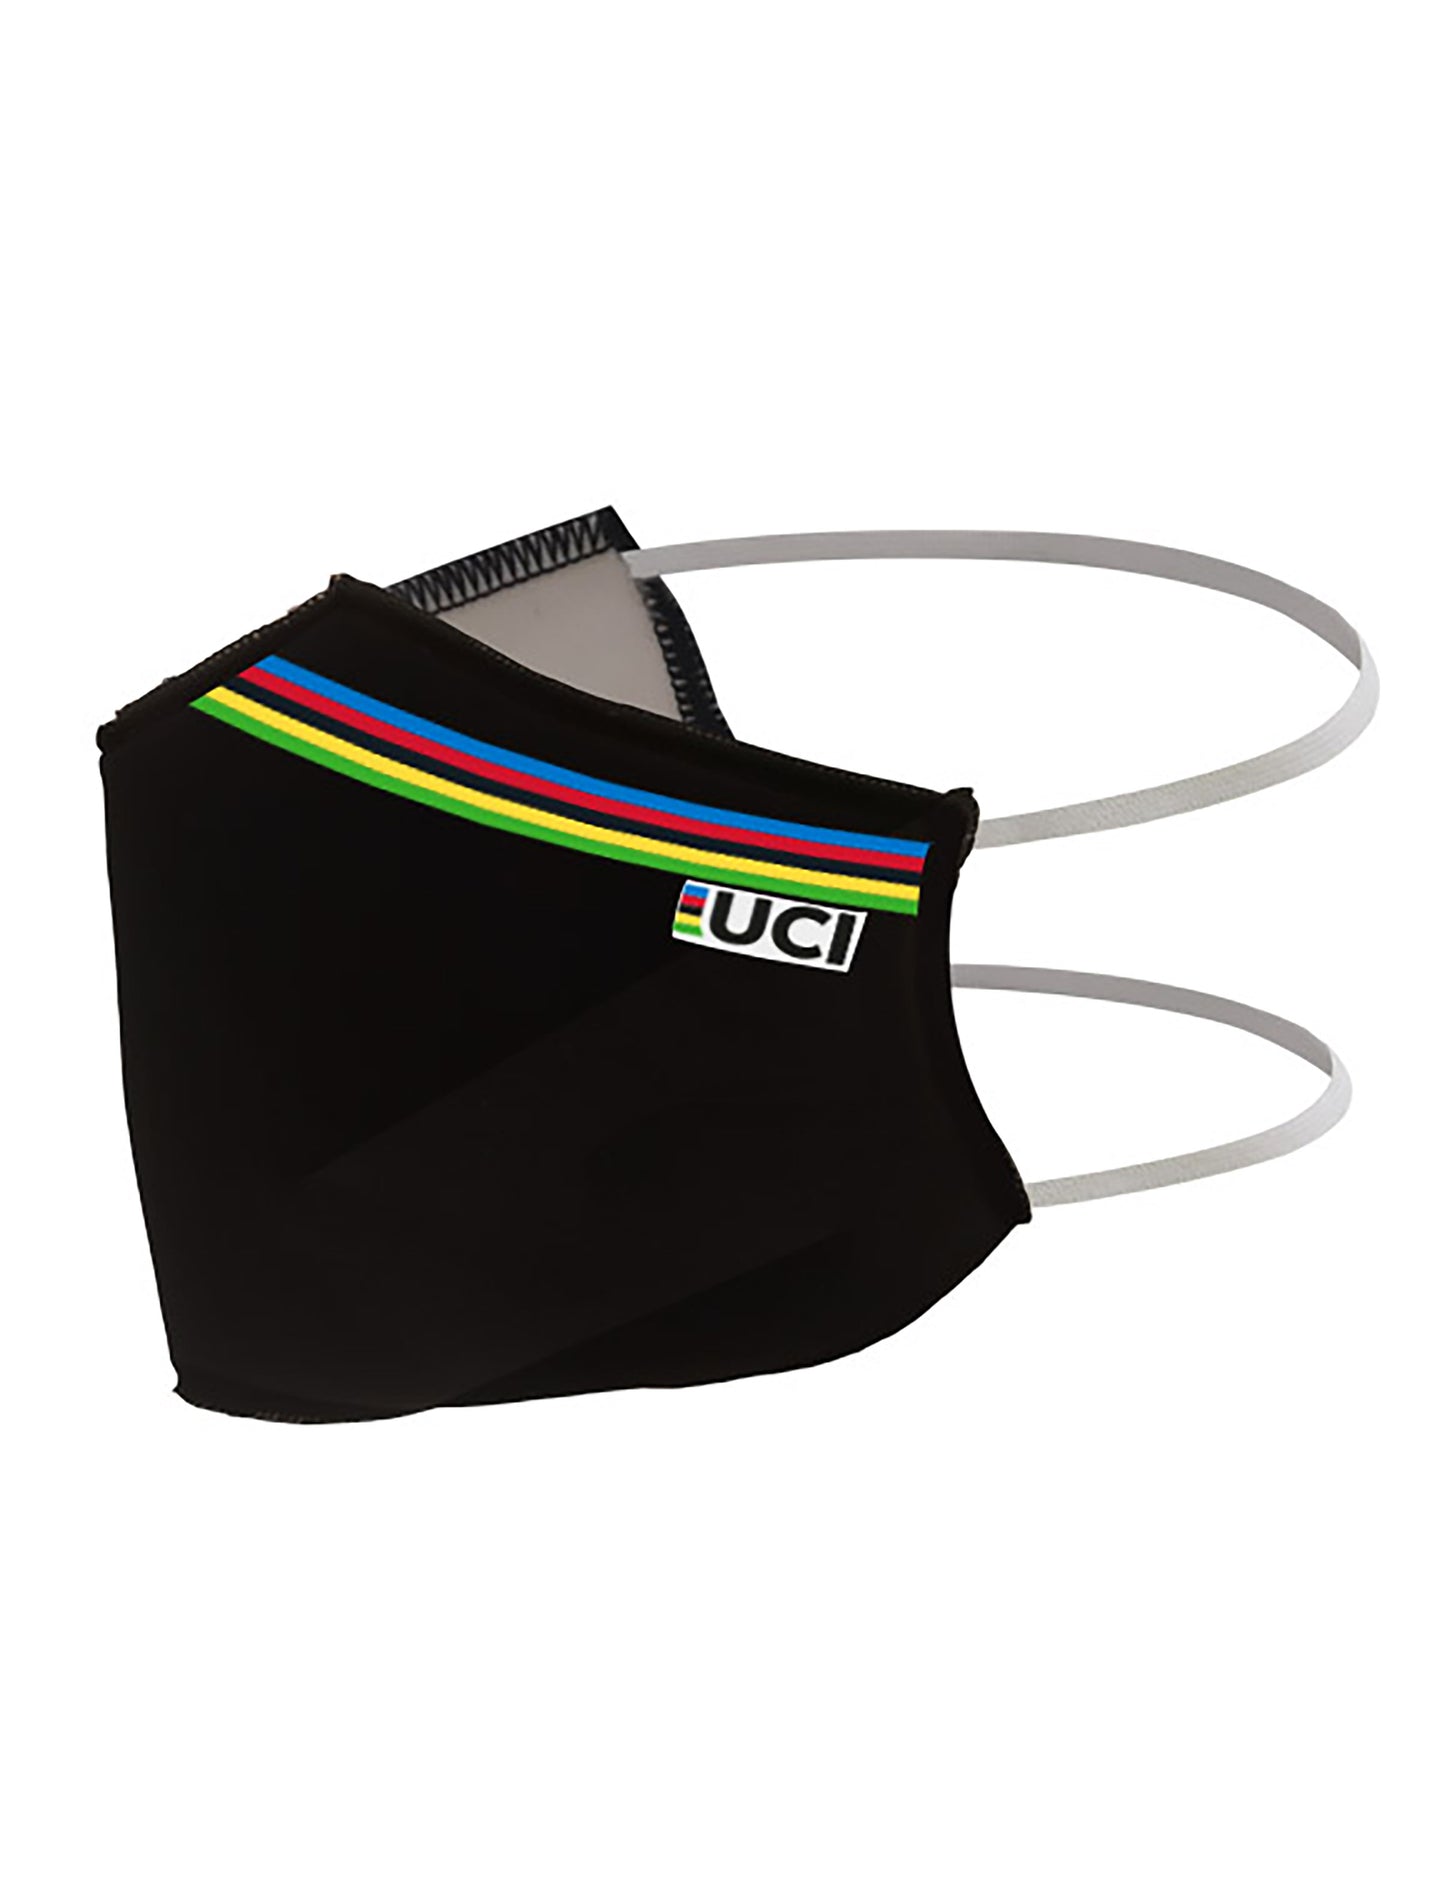 Official 2020 UCI Road Cycling World Championships Face Mask in Black | Cento Cycling